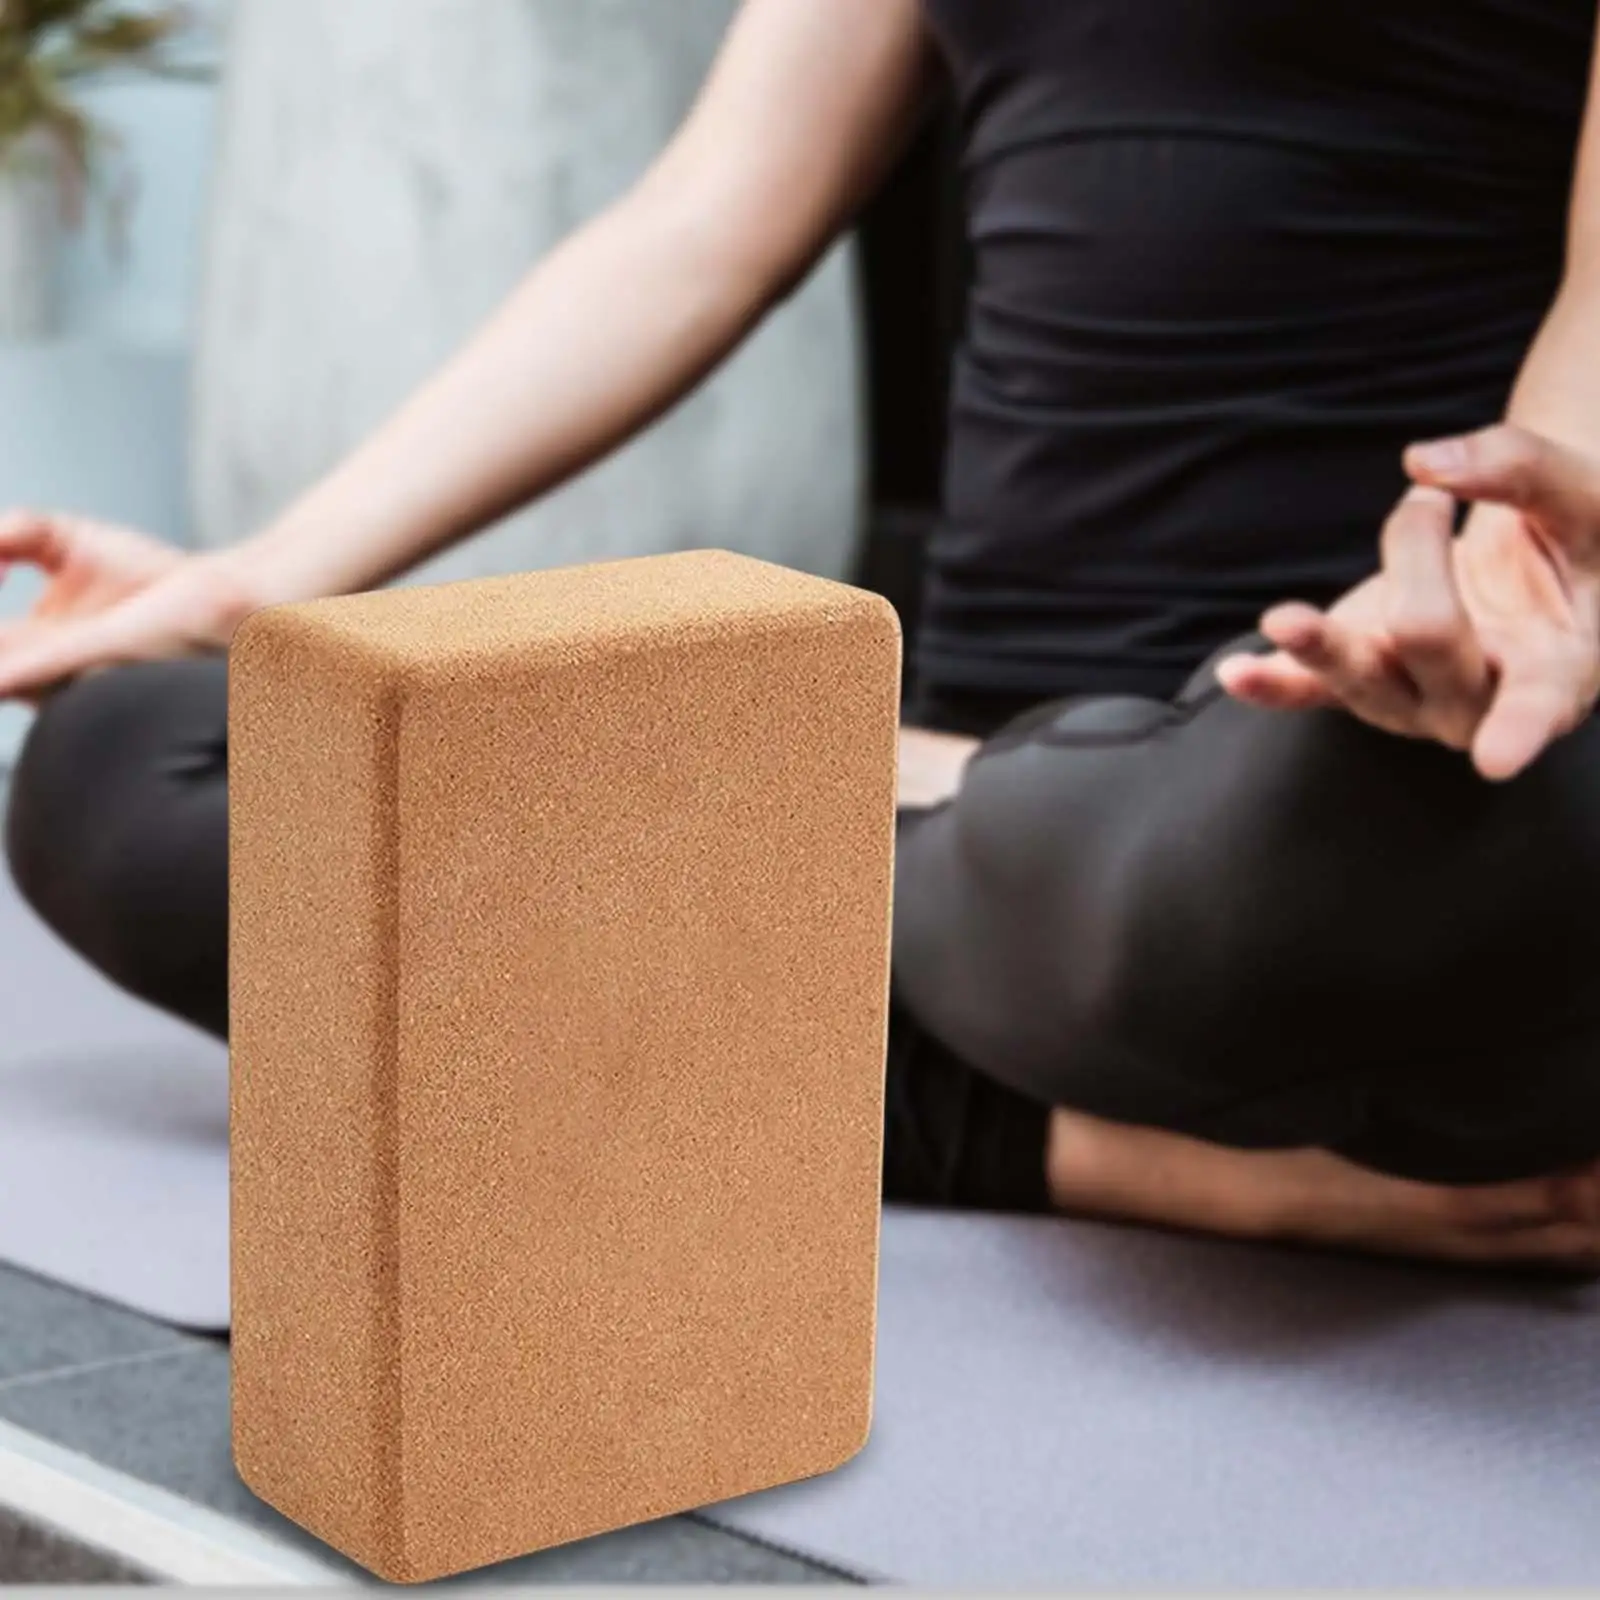 Yoga Brick Lightweight Squat Wedge Block for Stretching Gym Indoor Sports